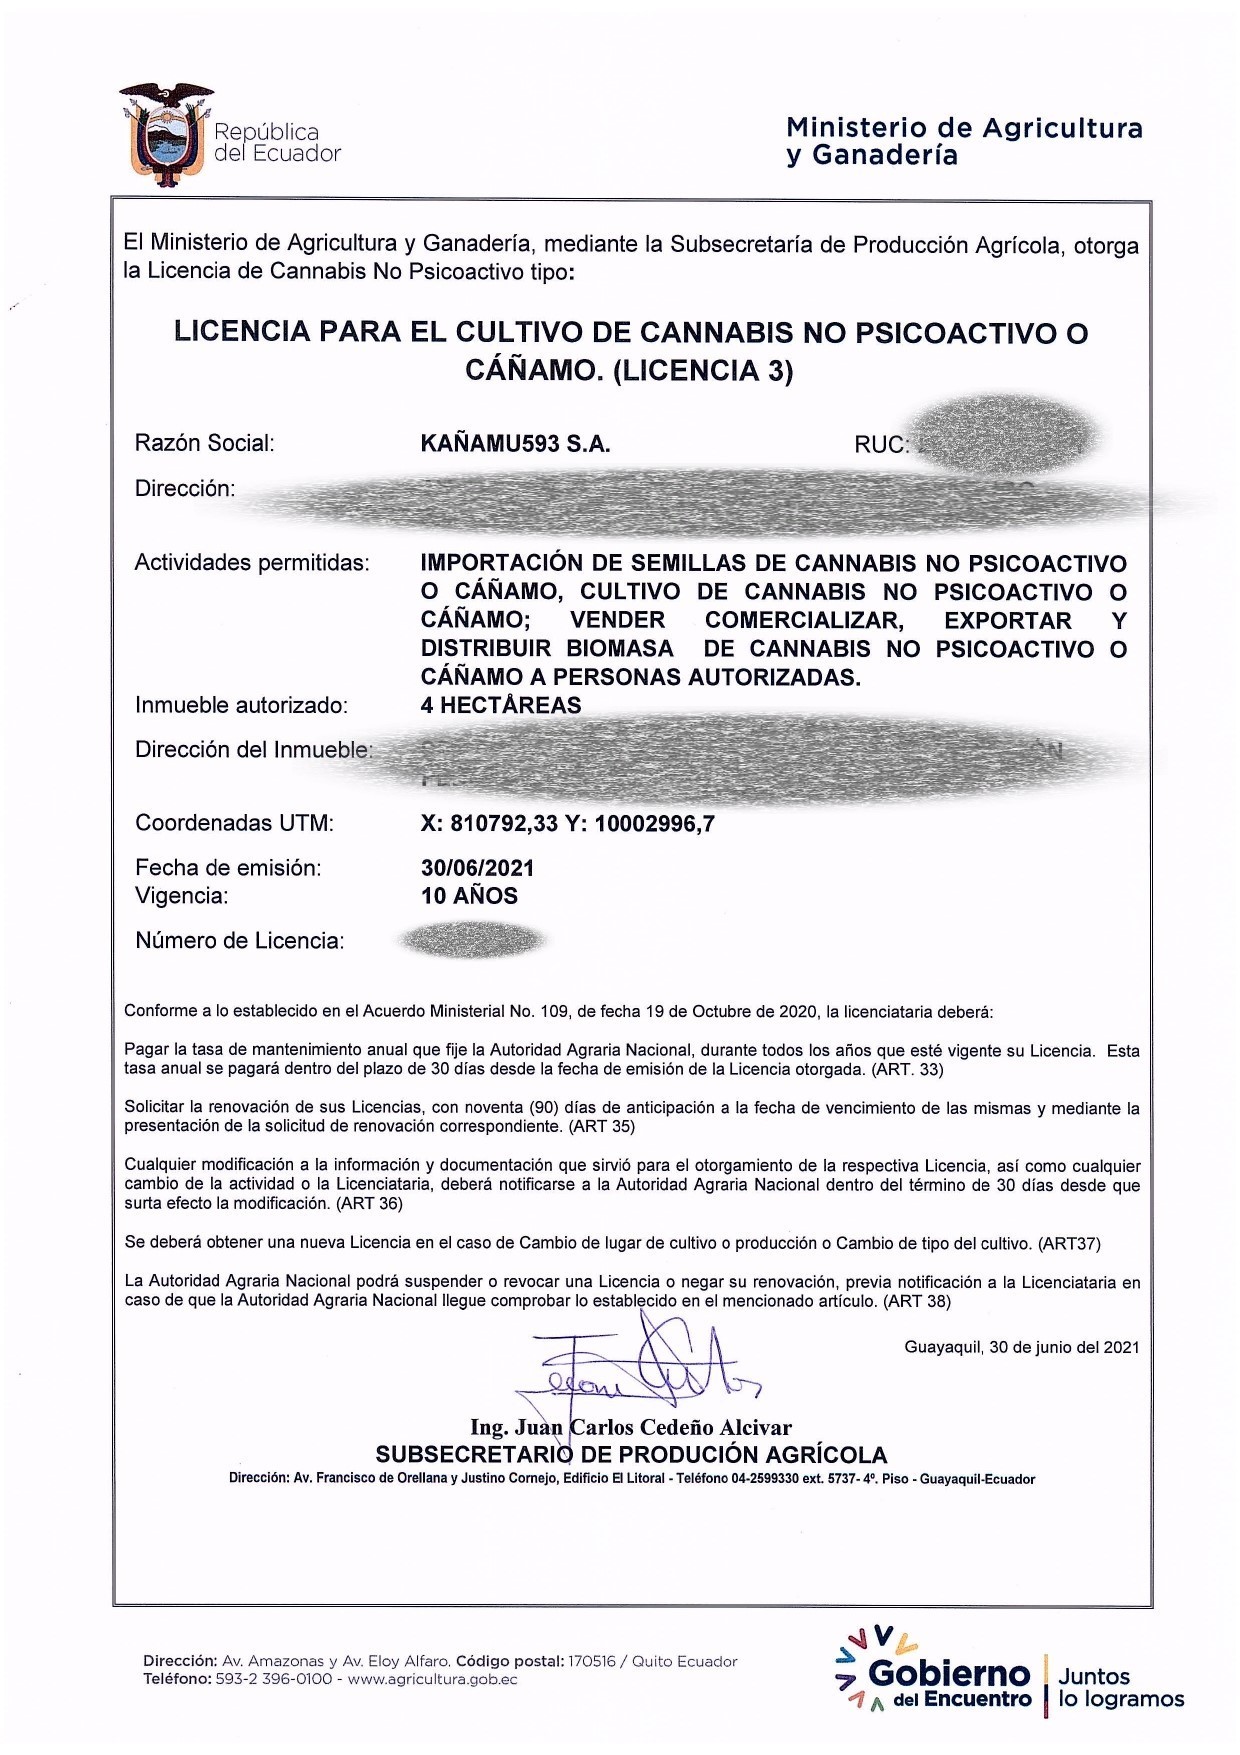 KAÑAMU593 OBTAINS LICENSE 3 FOR THE CULTIVATION OF CANNABIS FOR PHARMACEUTICAL USE